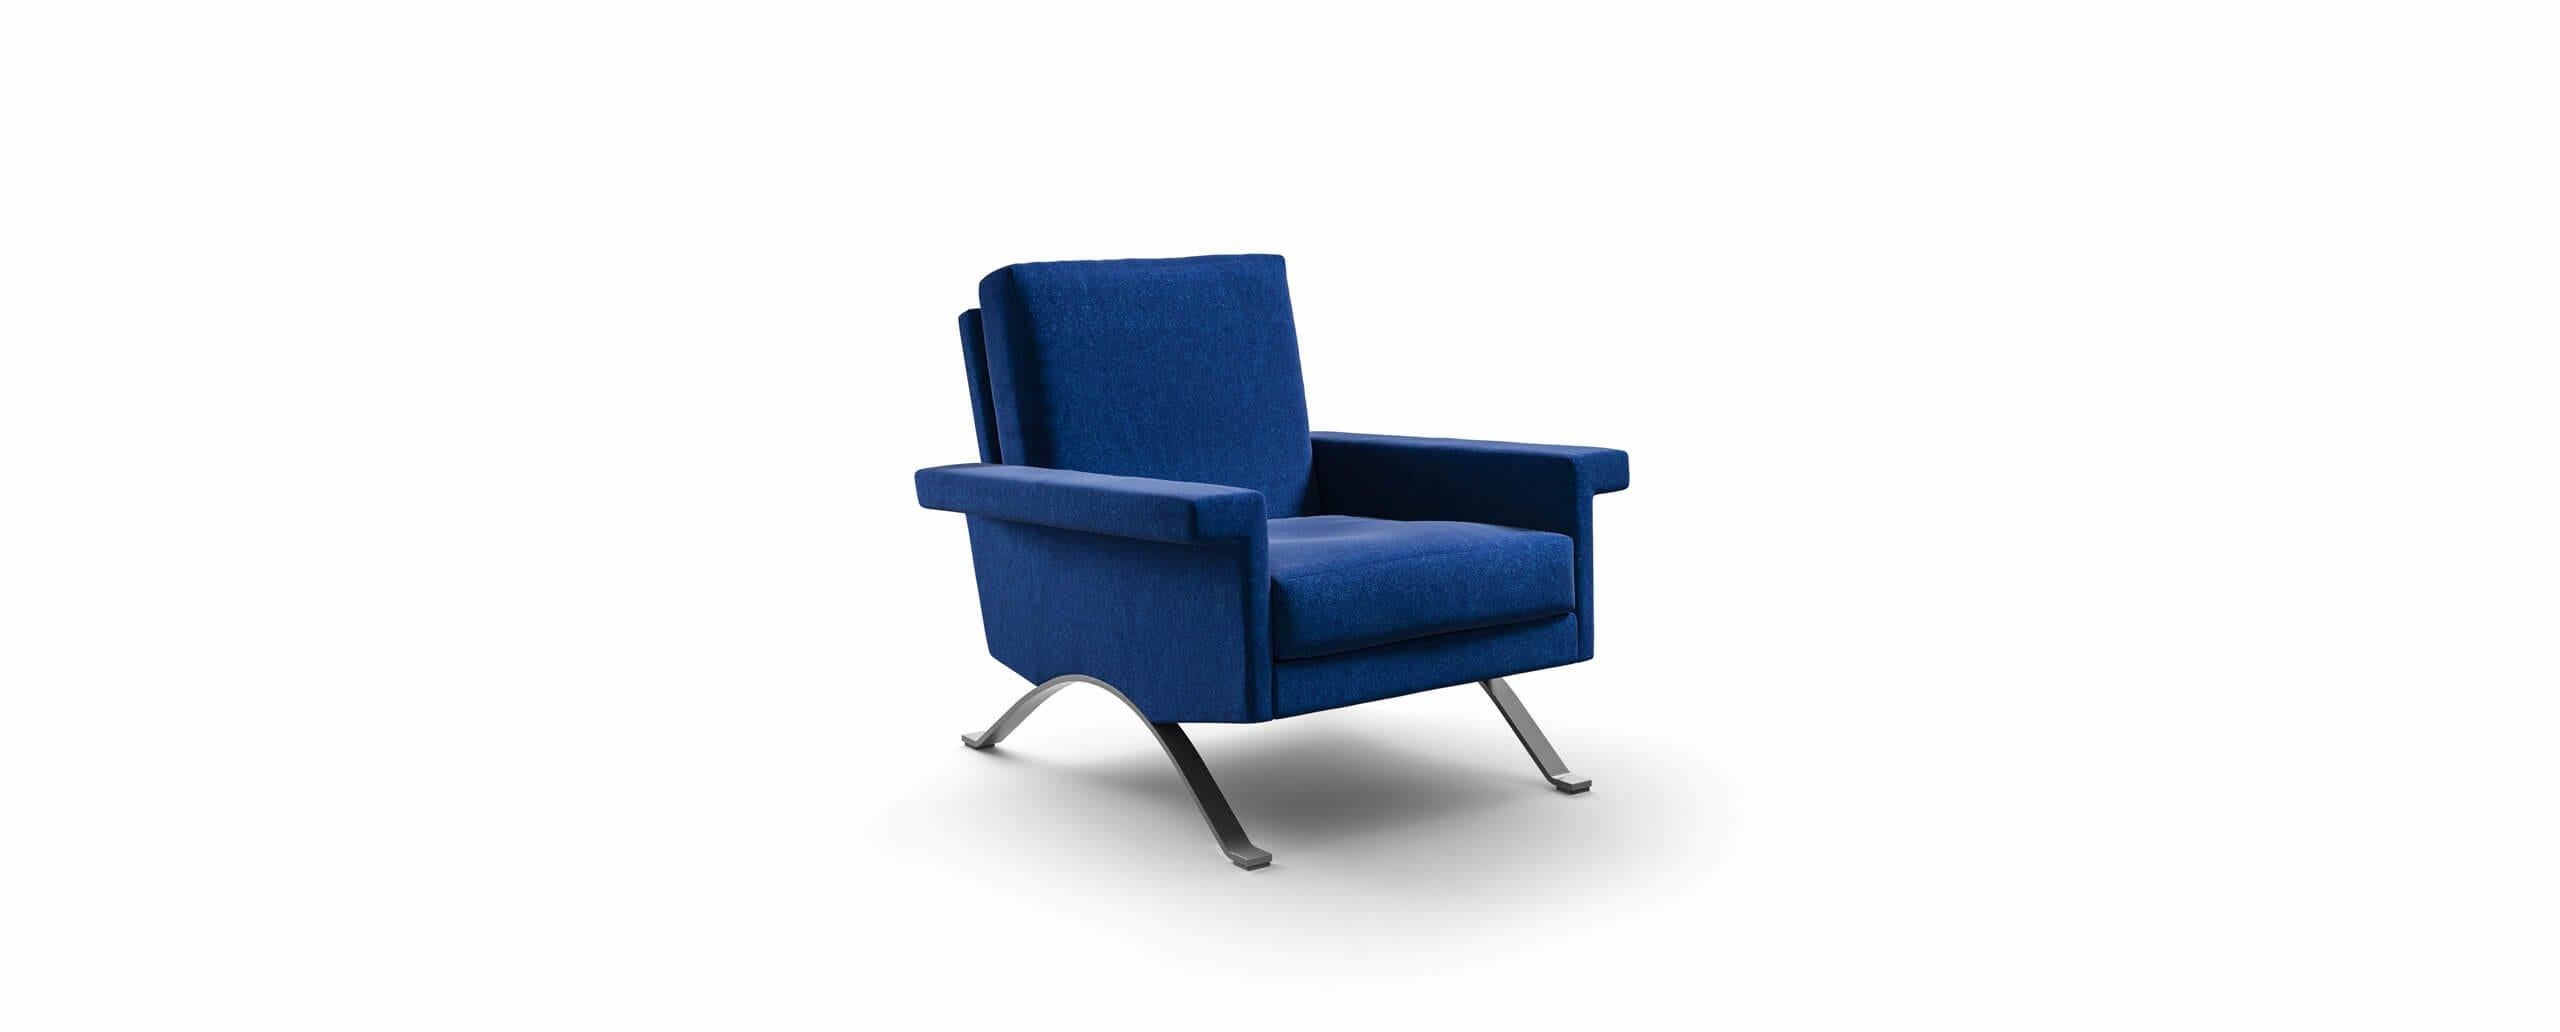 Armchair designed by Ico Parisi in 1960, relaunched in 2020.
Manufactured by Cassina in Italy.

Designed by Ico Parisi in 1960 for Cassina, at that time “Figli di Amedeo Cassina”, the 875 is a welcoming and elegant armchair. The author’s typical